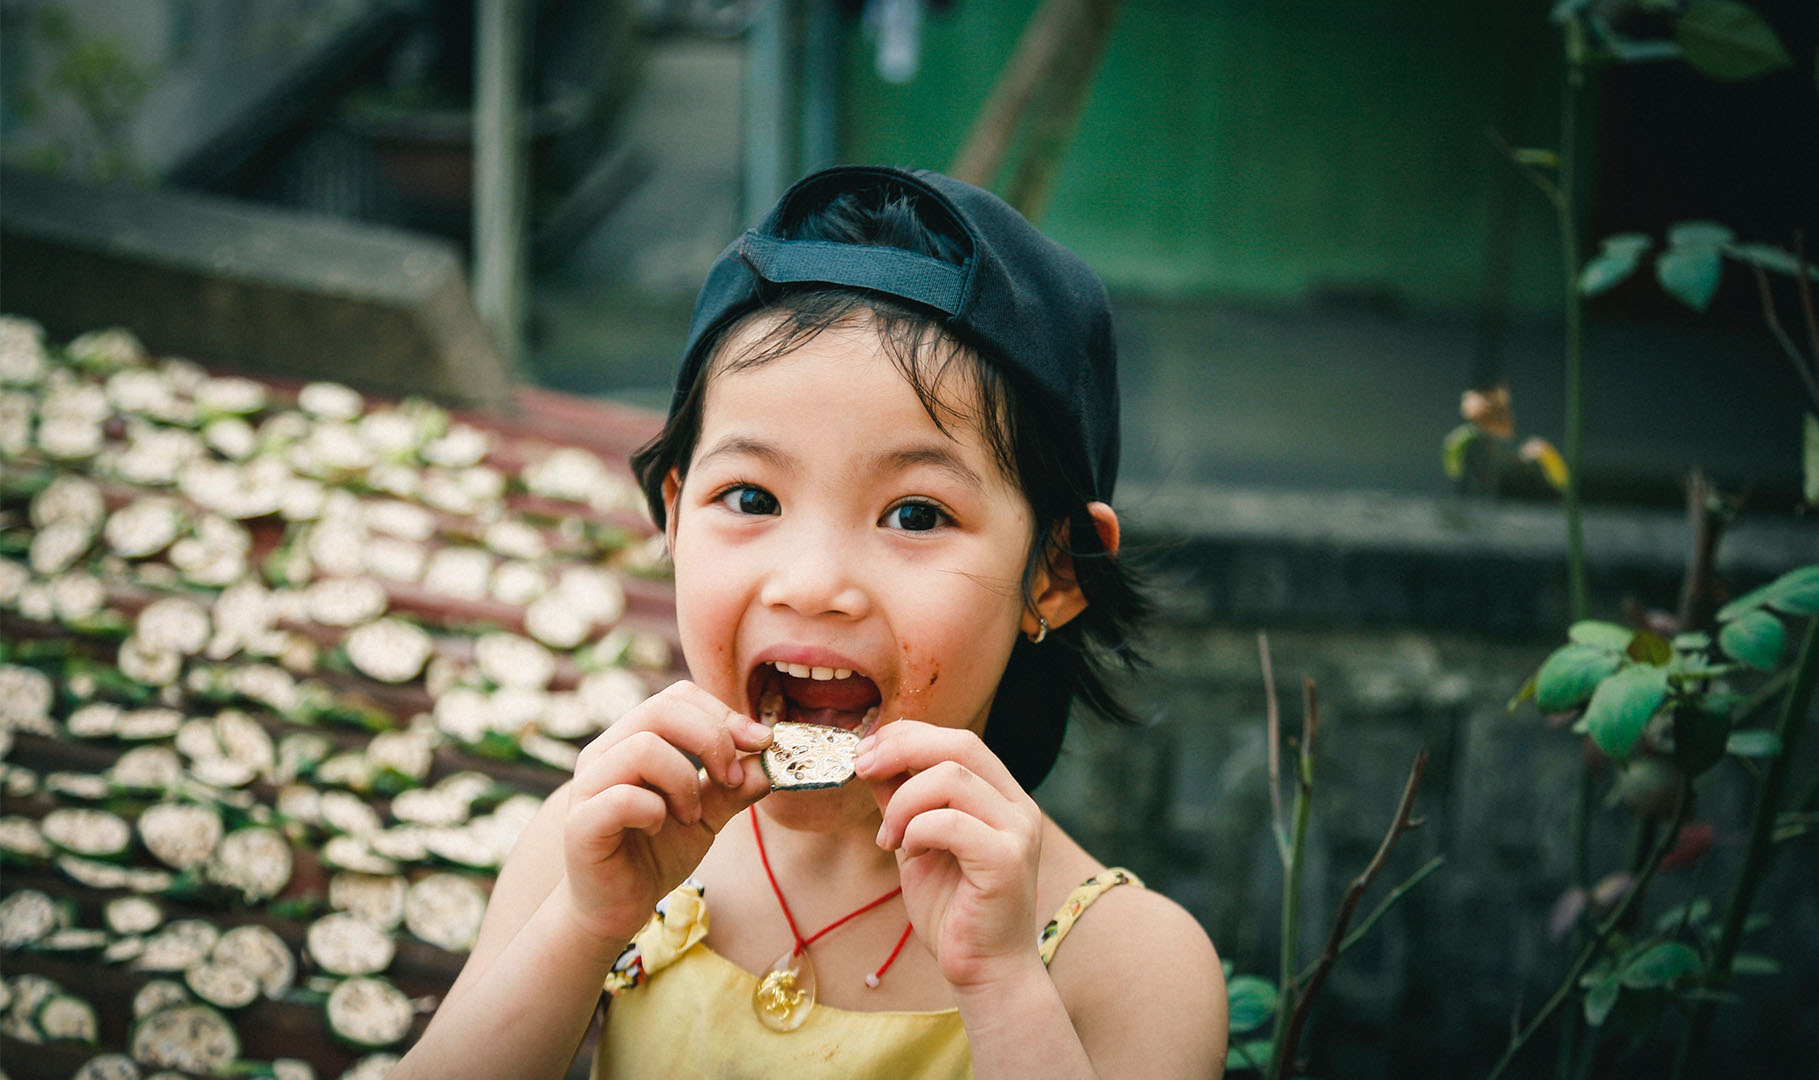 5 Simple Ways to Deal With Your Picky Eater Kid